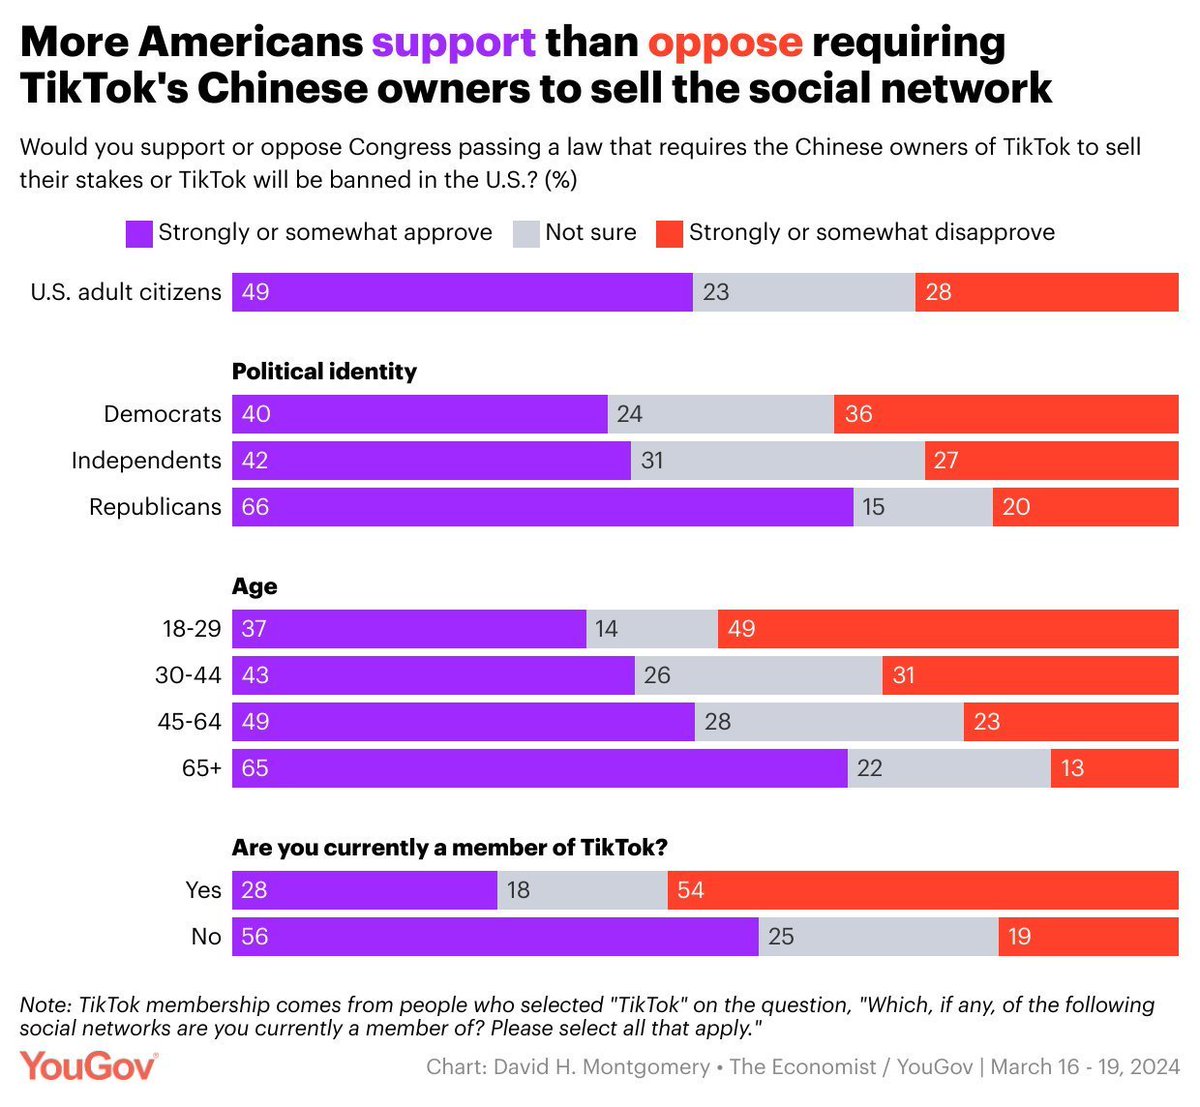 By 49% to 28%, Americans support a law requiring TikTok's Chinese owners to sell the social network or else TikTok will be banned in the U.S. today.yougov.com/technology/art…